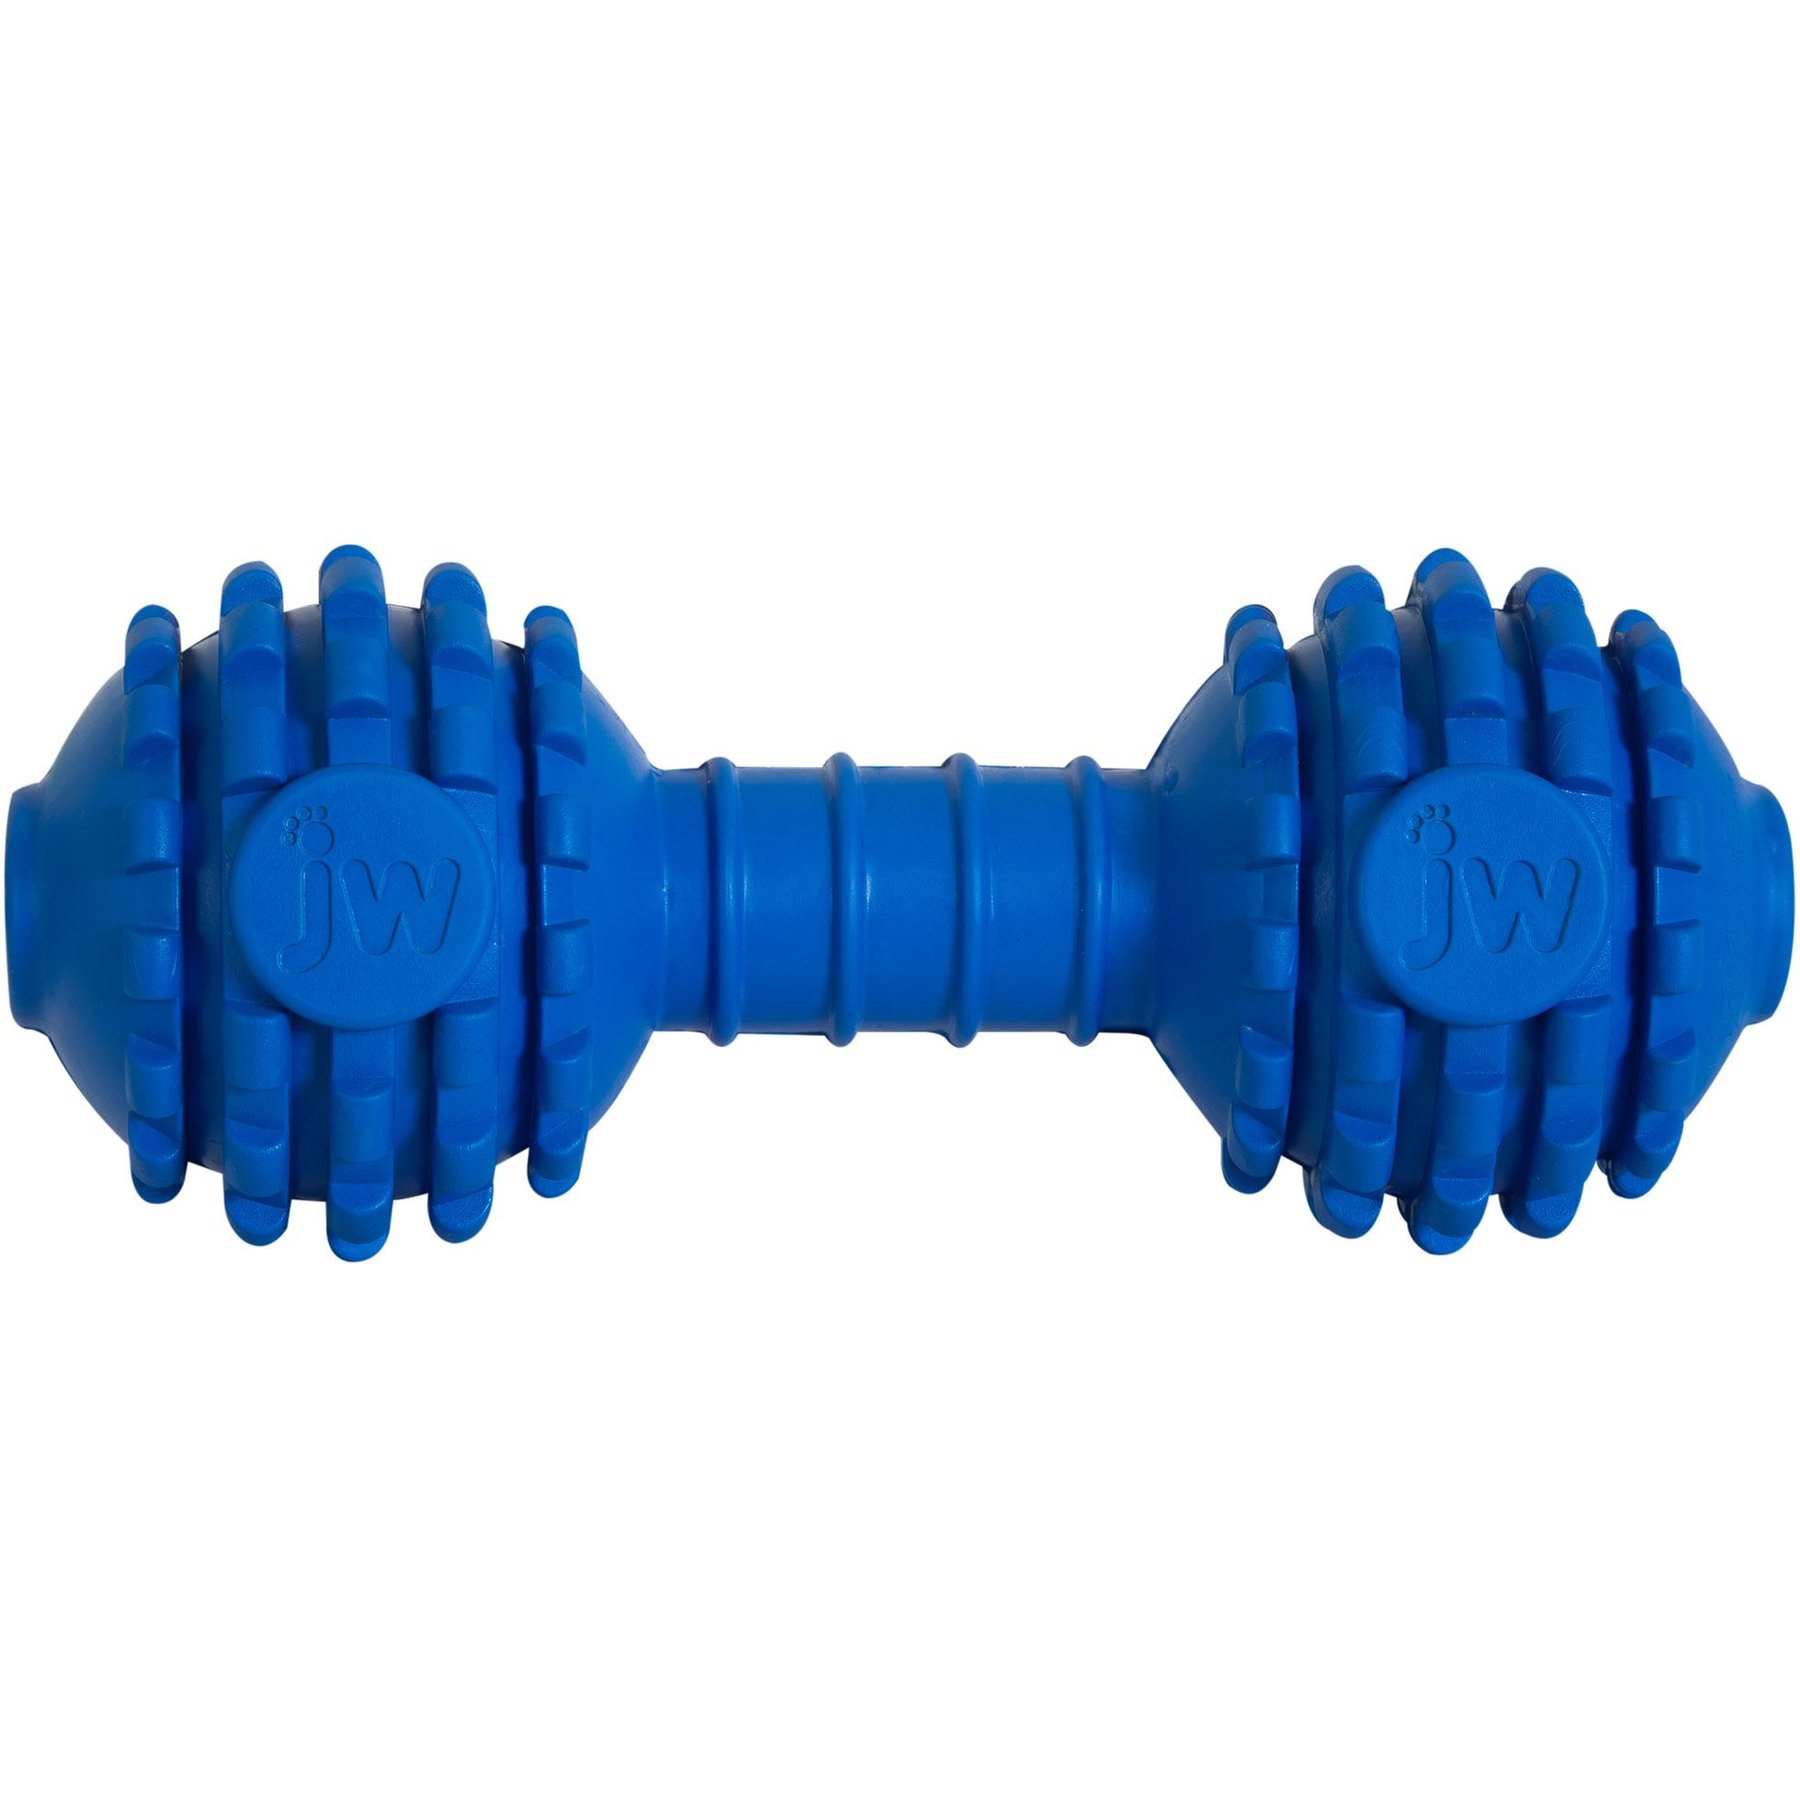 Natural Rubber Teeth Cleaning Puppy Treat Toys - Blue - Pet Clever